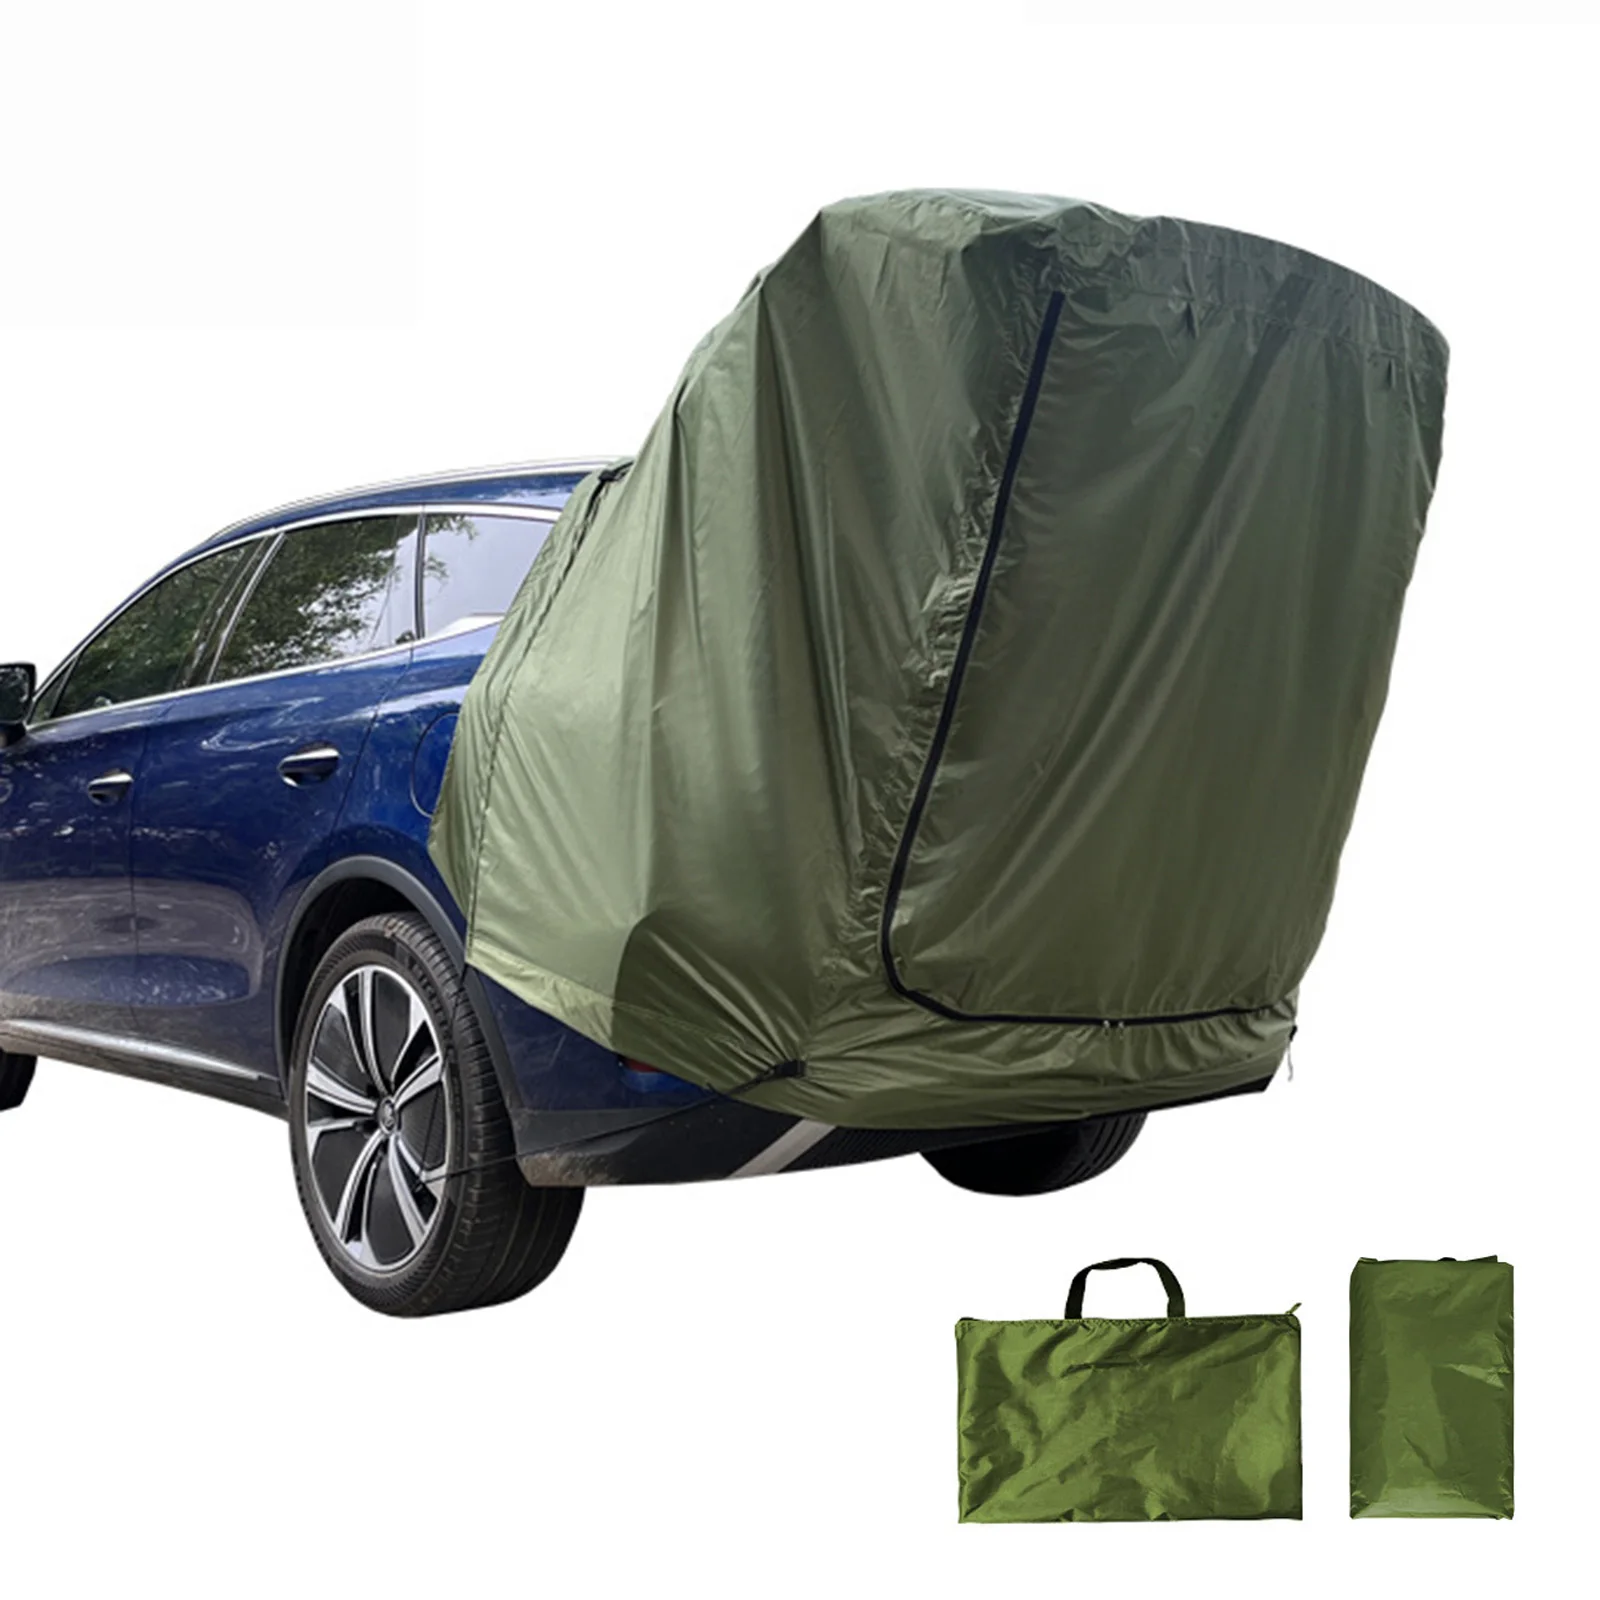 

SUV Rear Tent Car Tailgate Tent Outdoor Sports Parts Rear Car Hiking SUV Shade Tailgate Tent Tents Cabana Camping